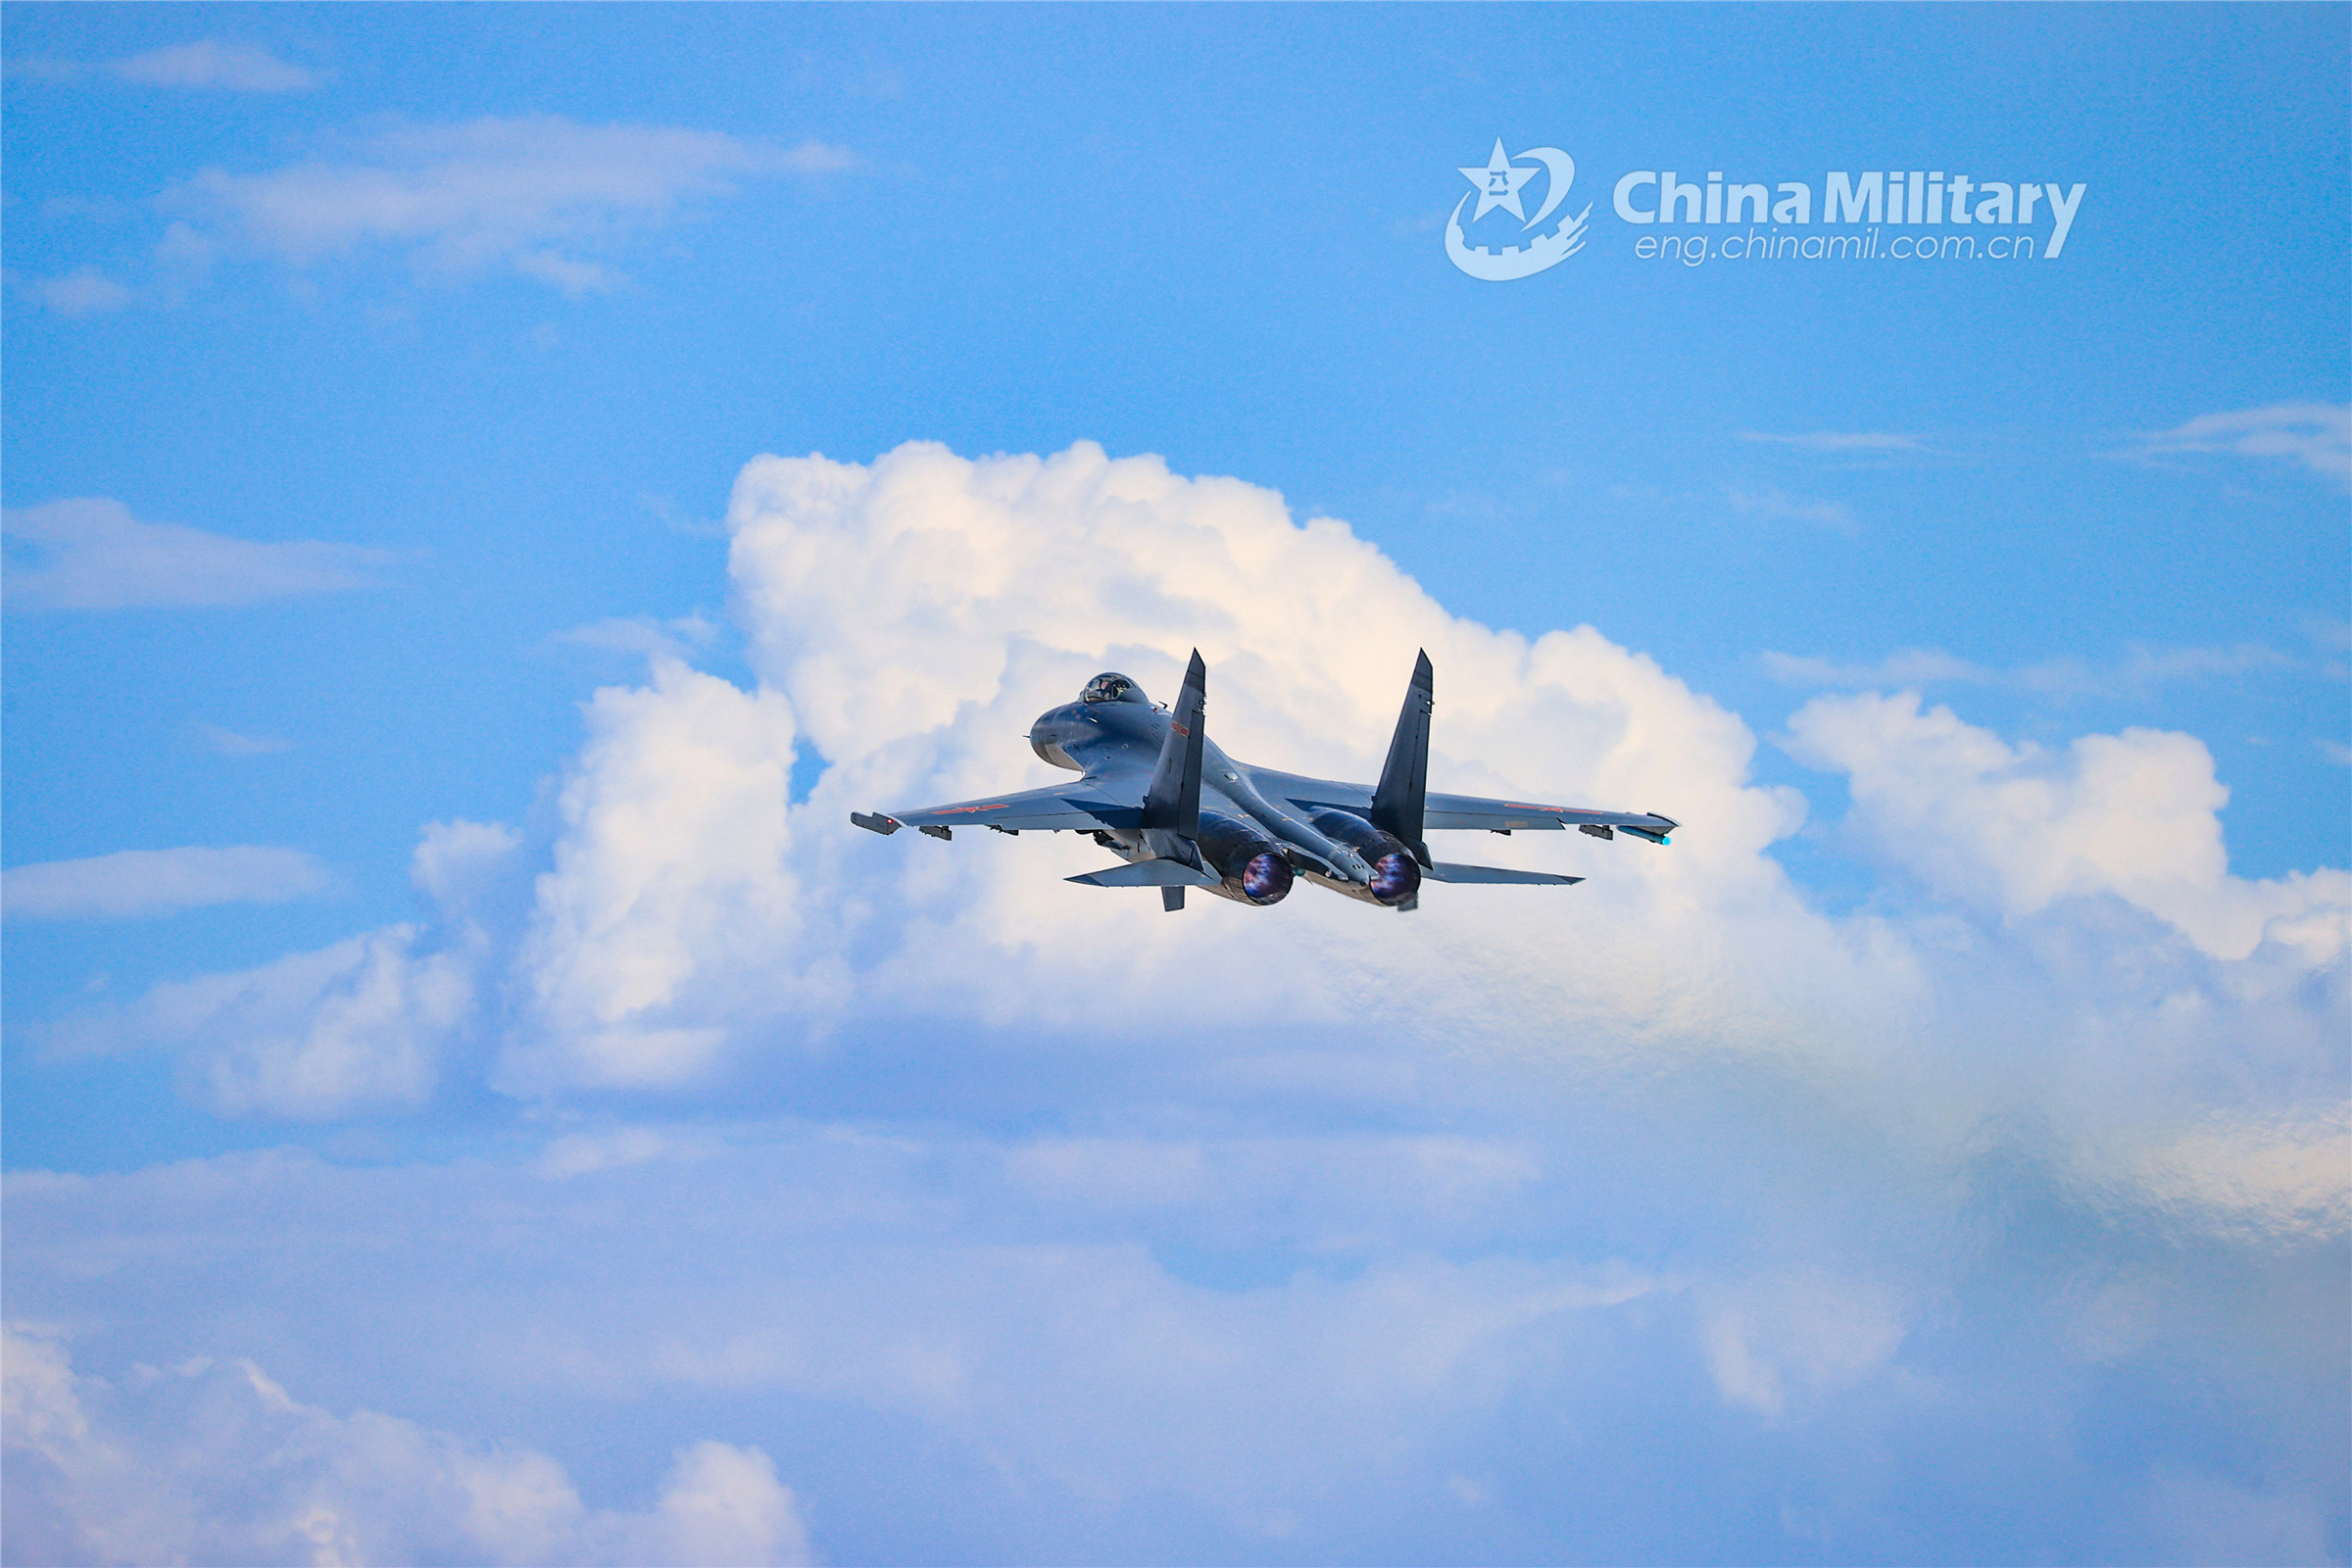 General 2400x1600 China aircraft clouds sky jet fighter military military aircraft PLAAF